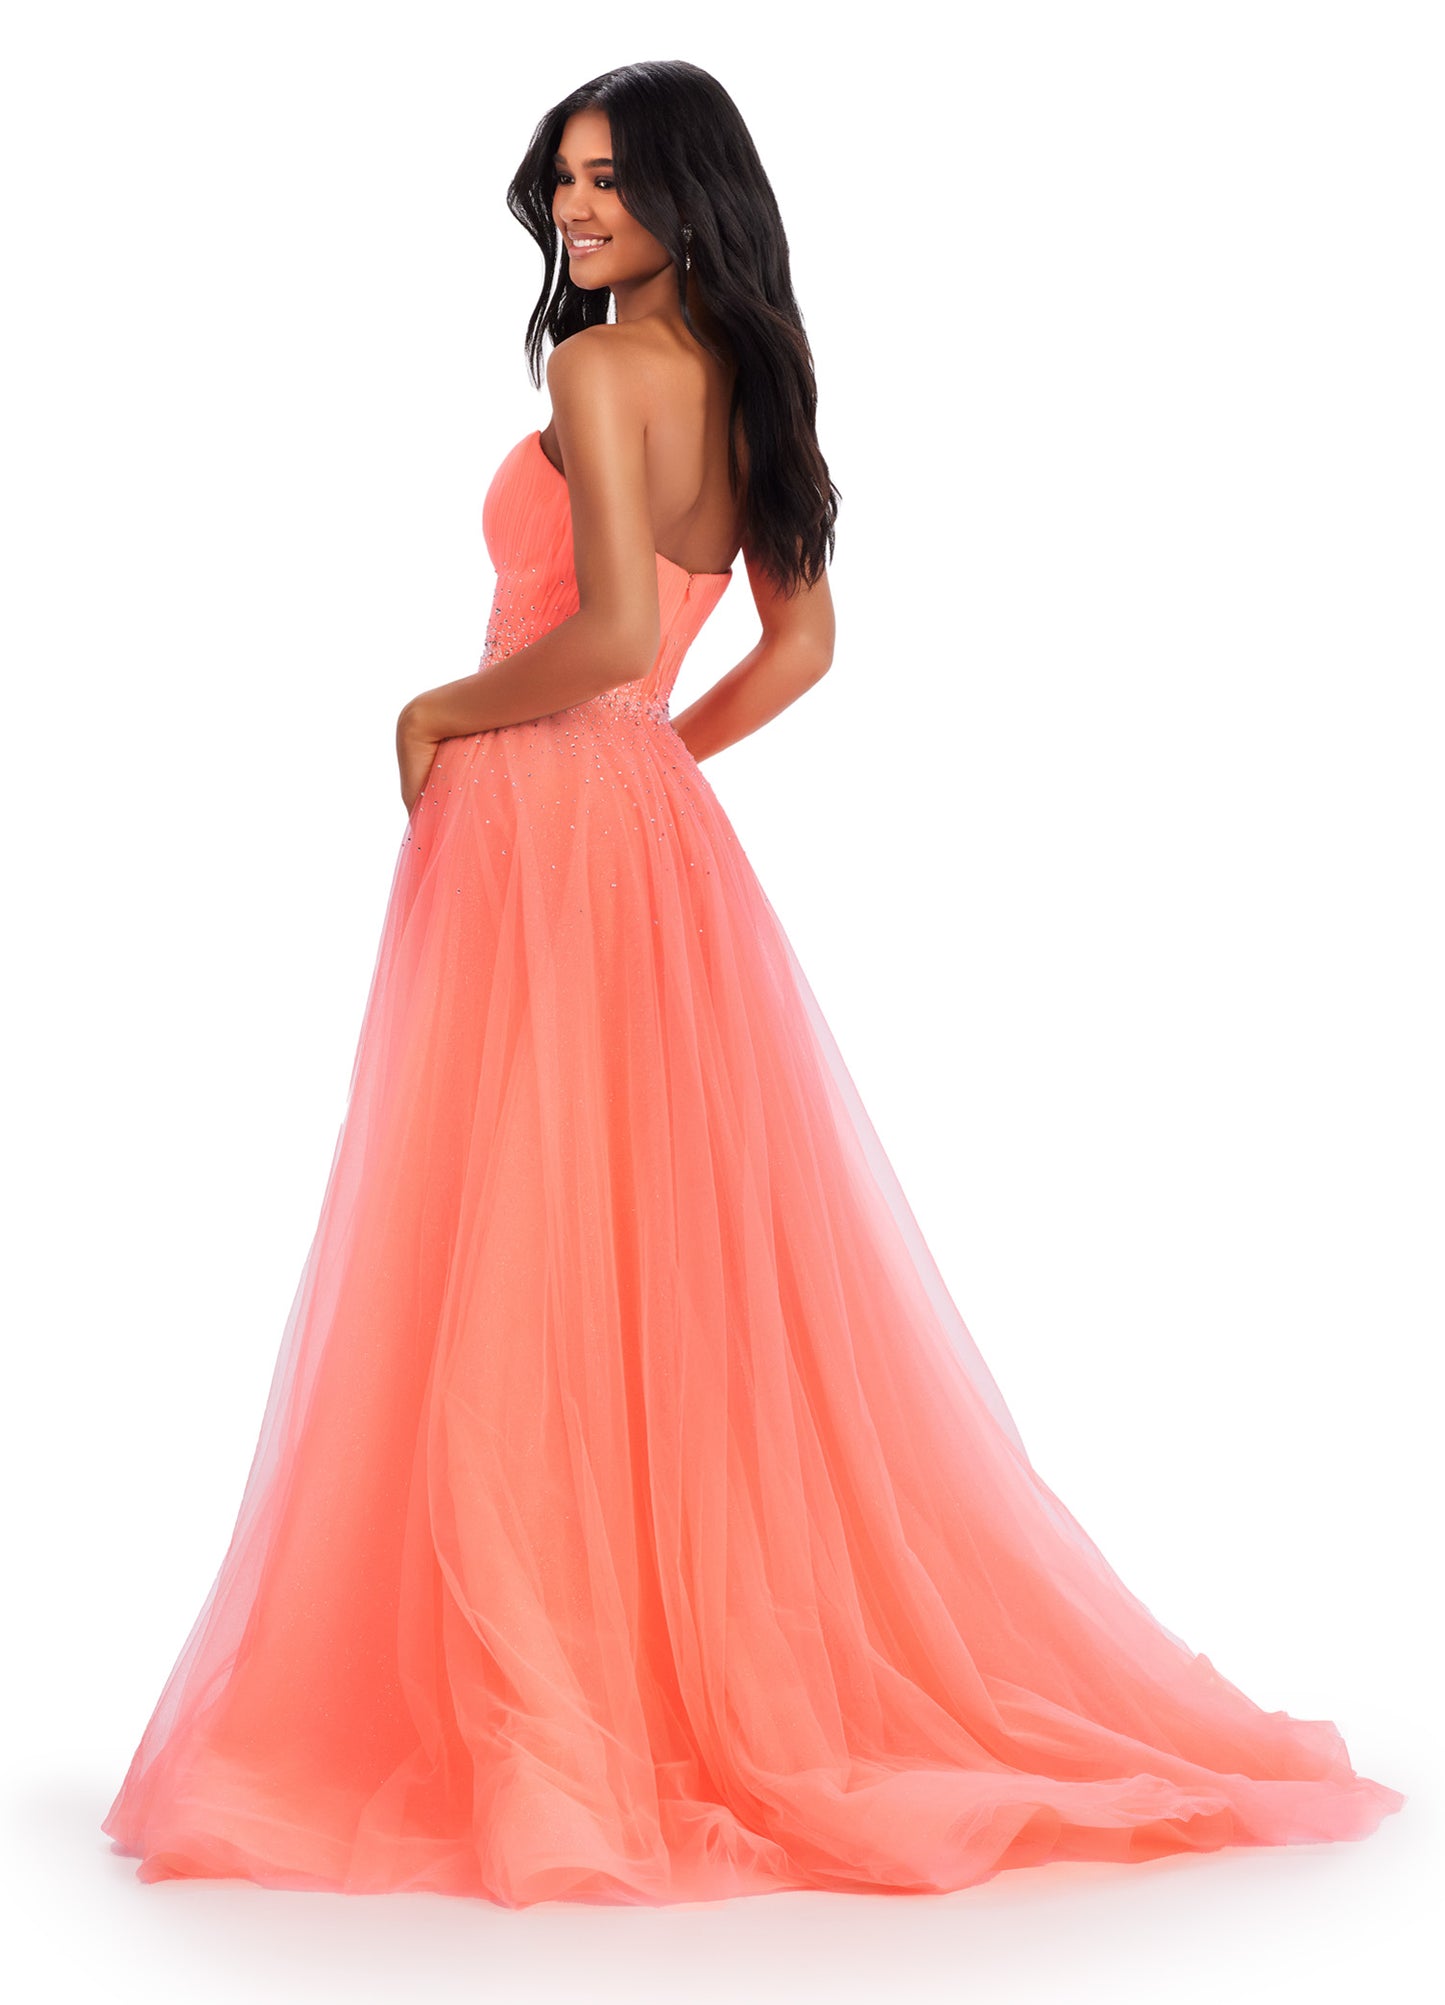 Expertly crafted by Ashley Lauren, this 11597 Long Prom Dress exudes timeless elegance. The strapless design coupled with glittery tulle creates a stunning ball gown silhouette. Adorned with a beautiful beaded belt, this formal pageant gown is a perfect choice for any special occasion. The perfect dress fit for a princess. This strapless glitter tulle ball gown features a beaded waist detail that'll be sure to make you sparkle at your next event!